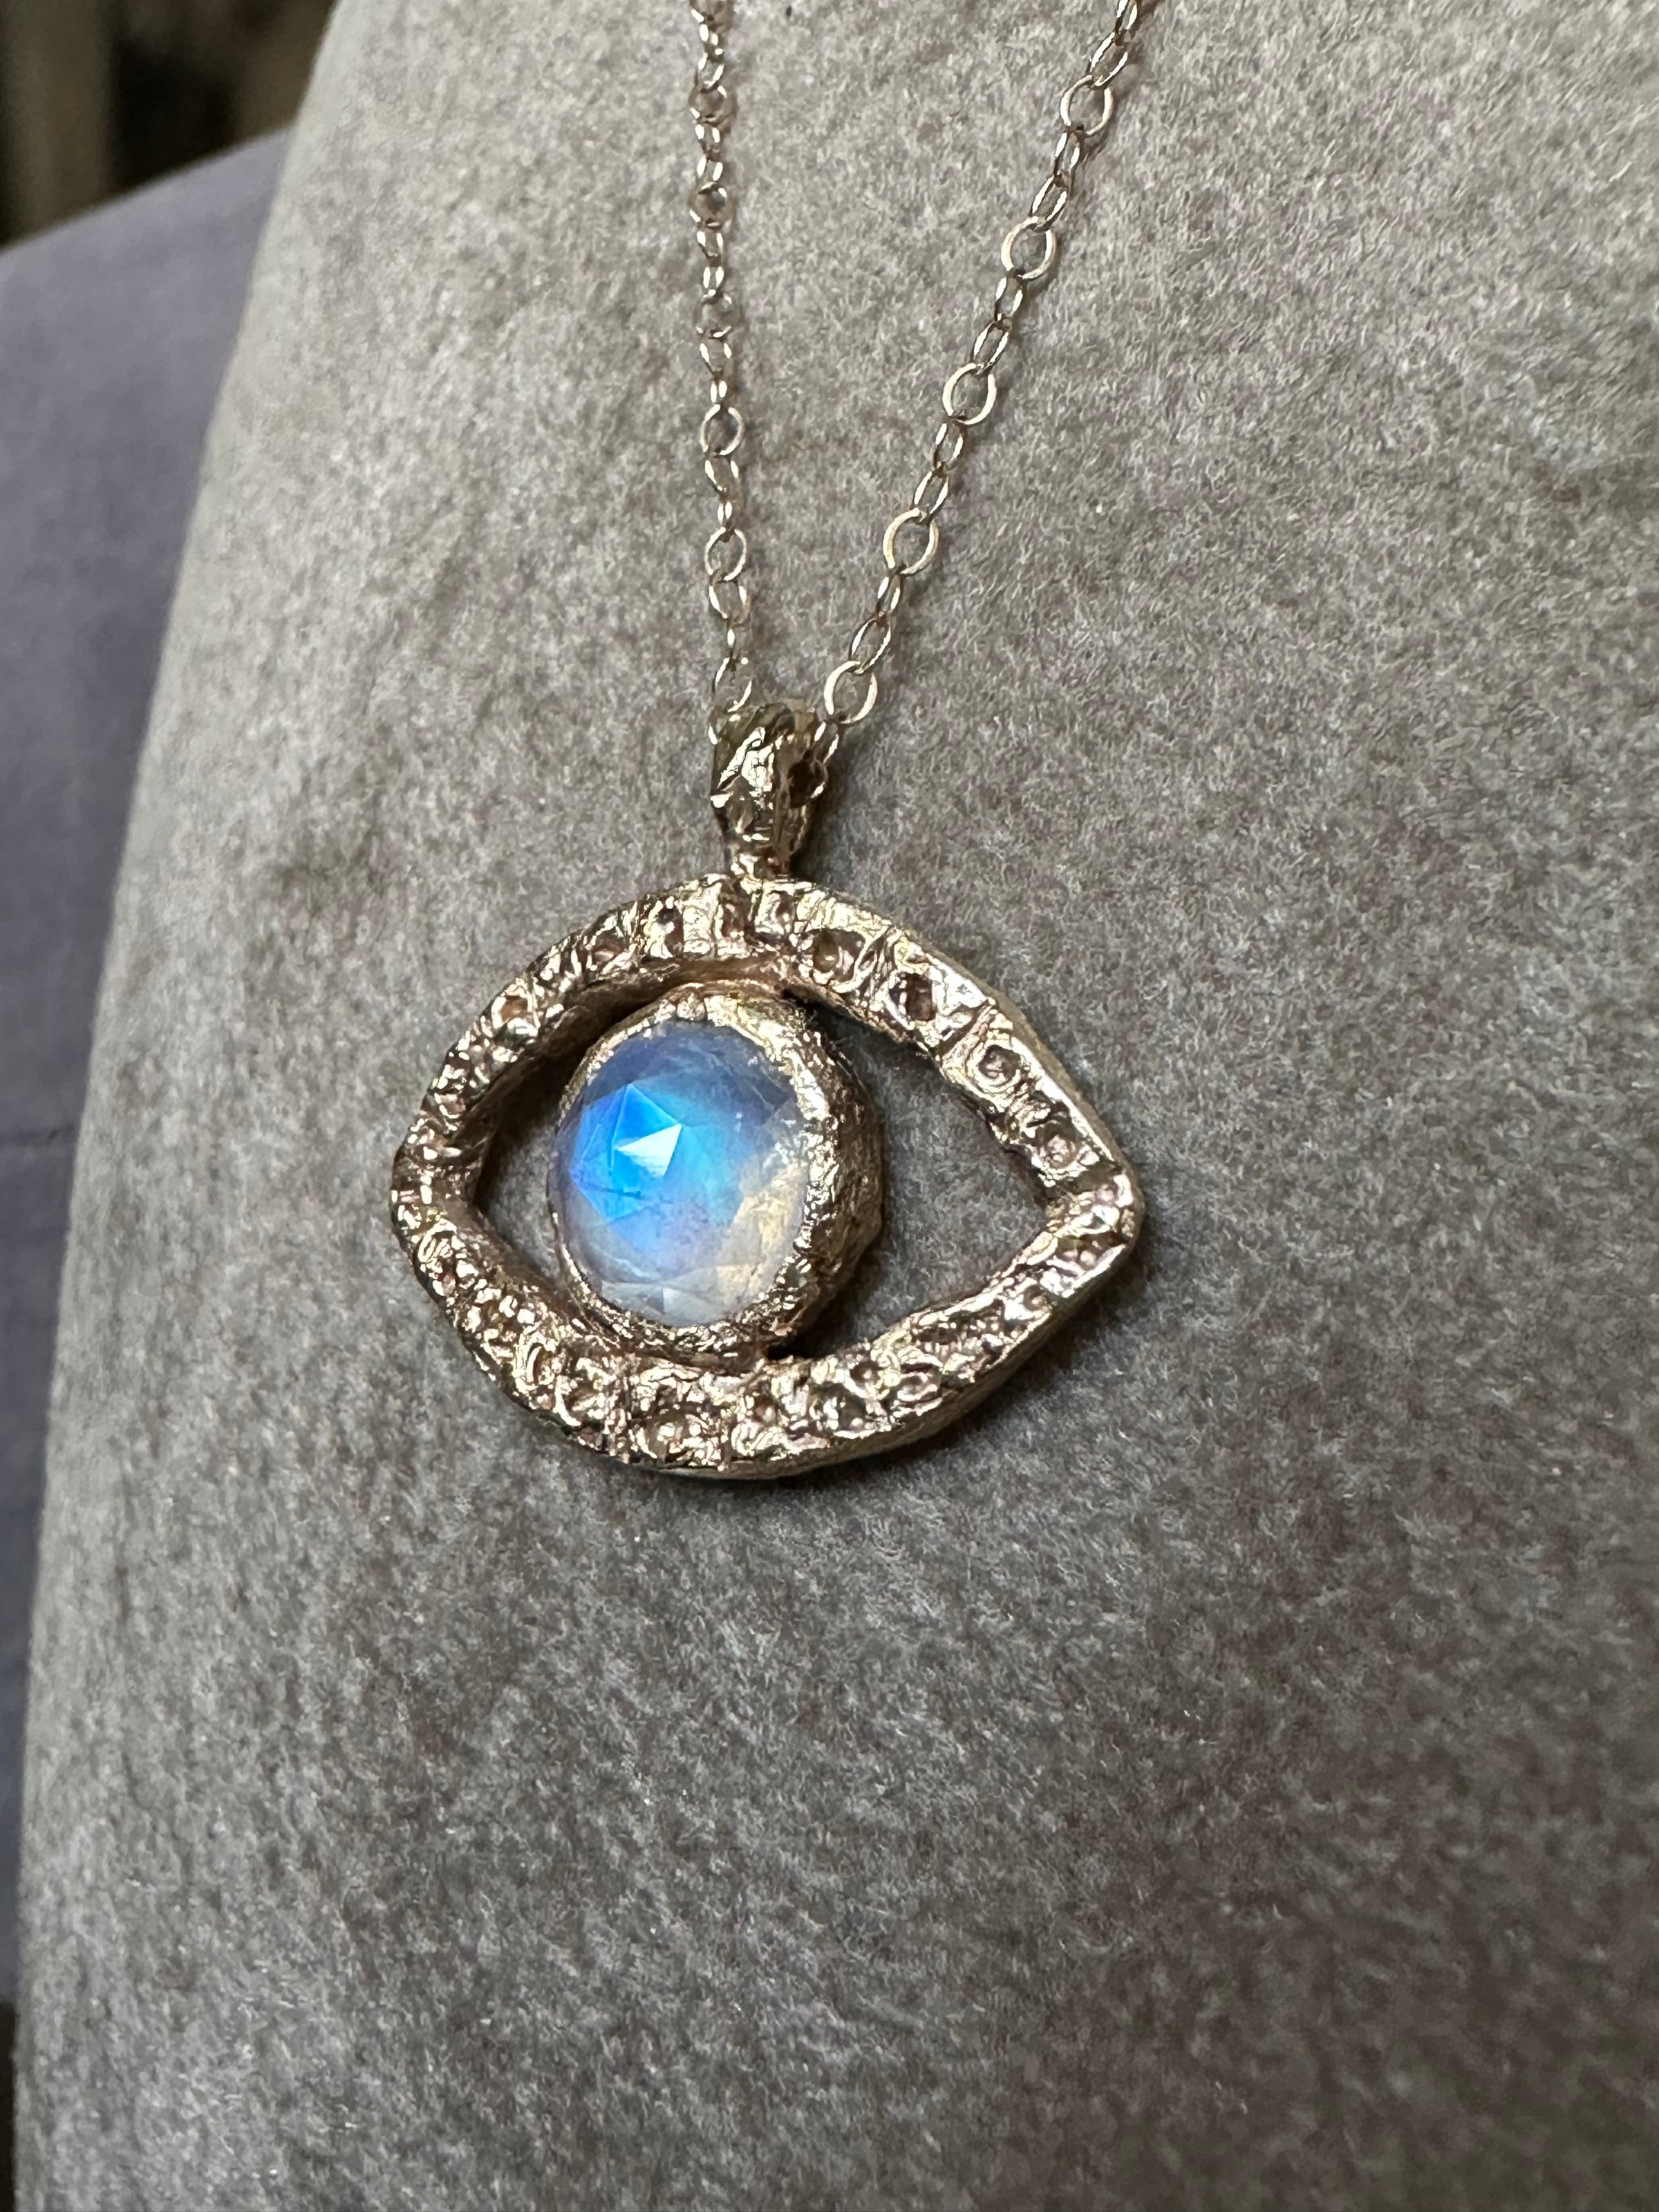 Rainbow Moonstone Eye Necklace  One of a kind 14K Yellow Gold